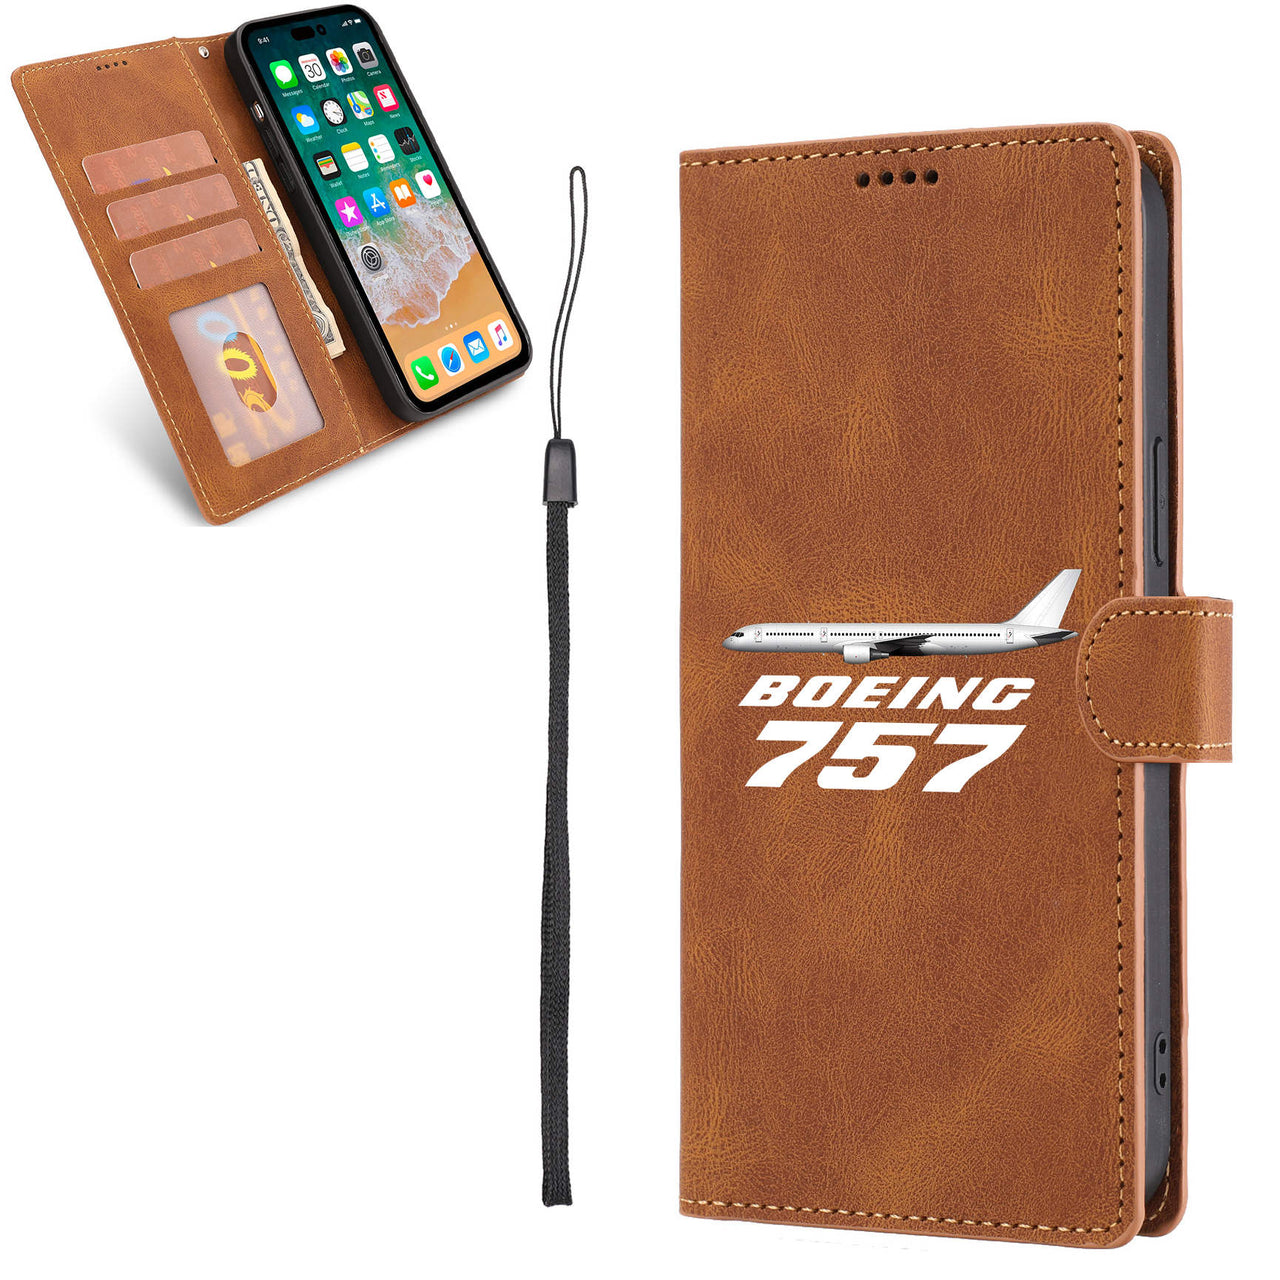 The Boeing 757 Designed Leather iPhone Cases